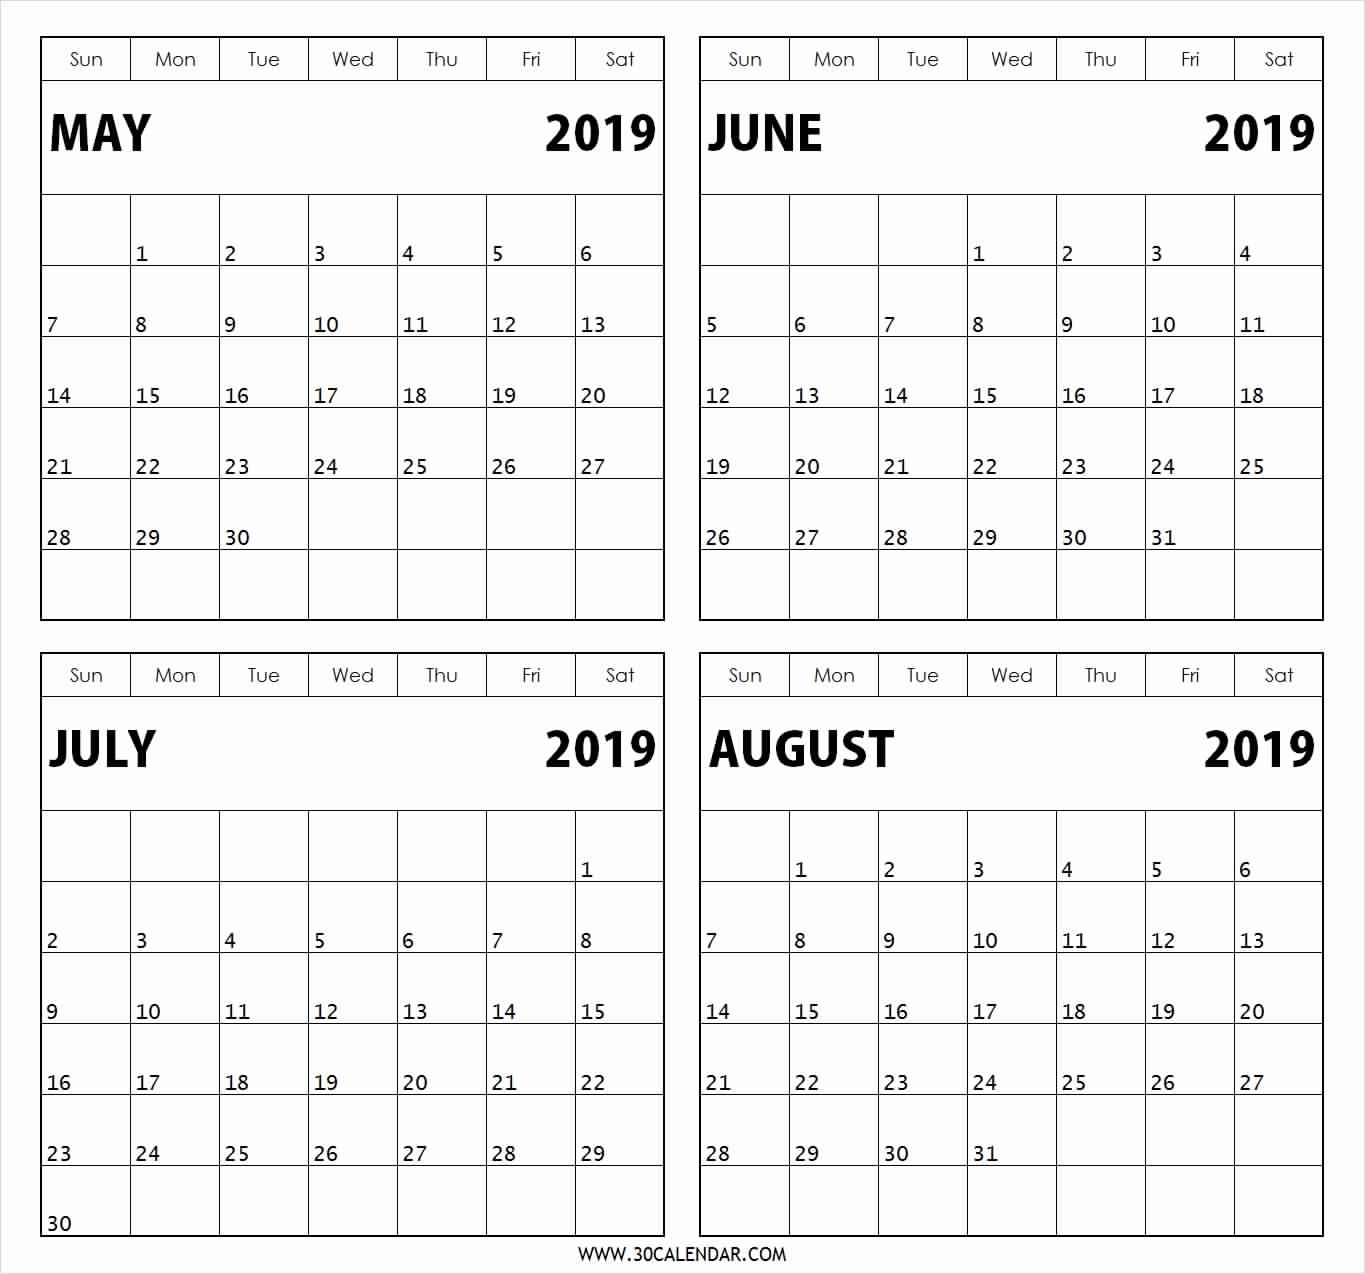 Printable 2019 Calendar 3 Months Per Page | Printable Calendar 2019 throughout August Calendar Printable 2 Month On One Page